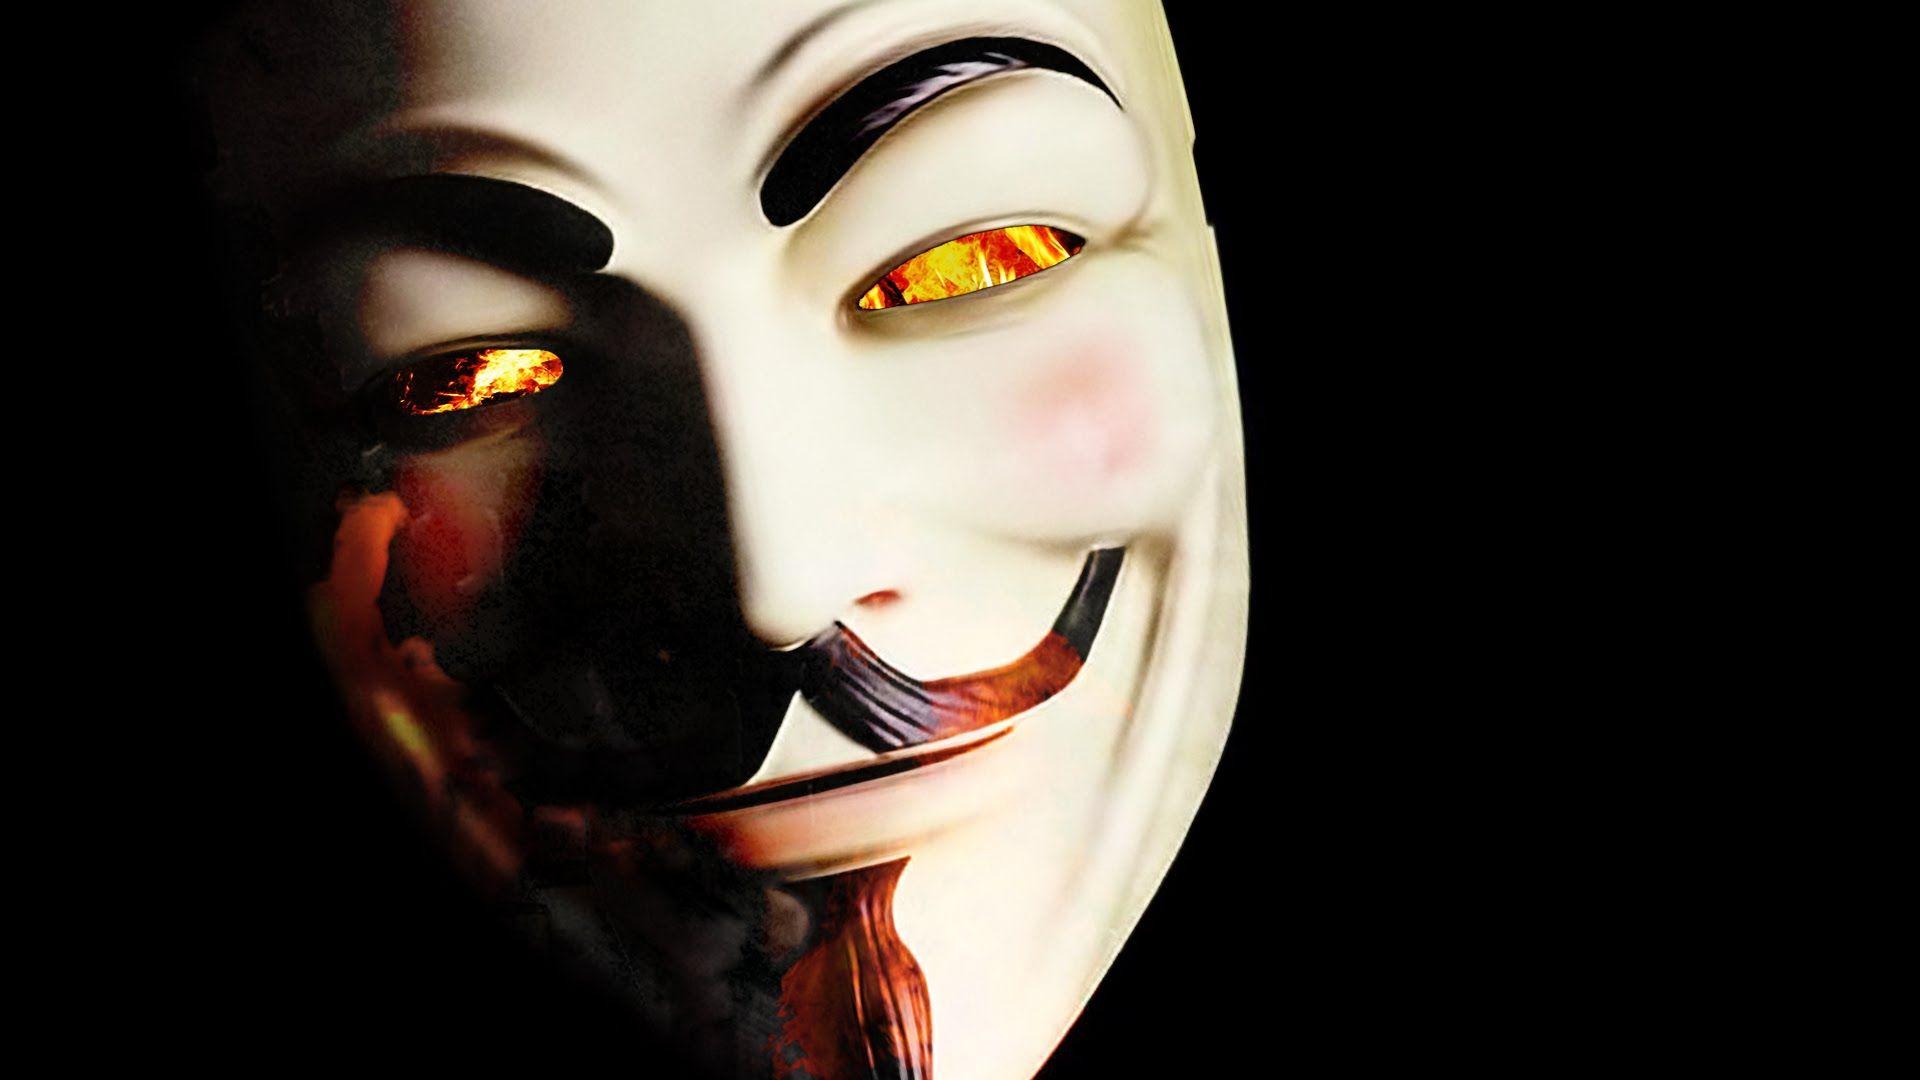 GUY FAWKES: The Guy Behind the Mask